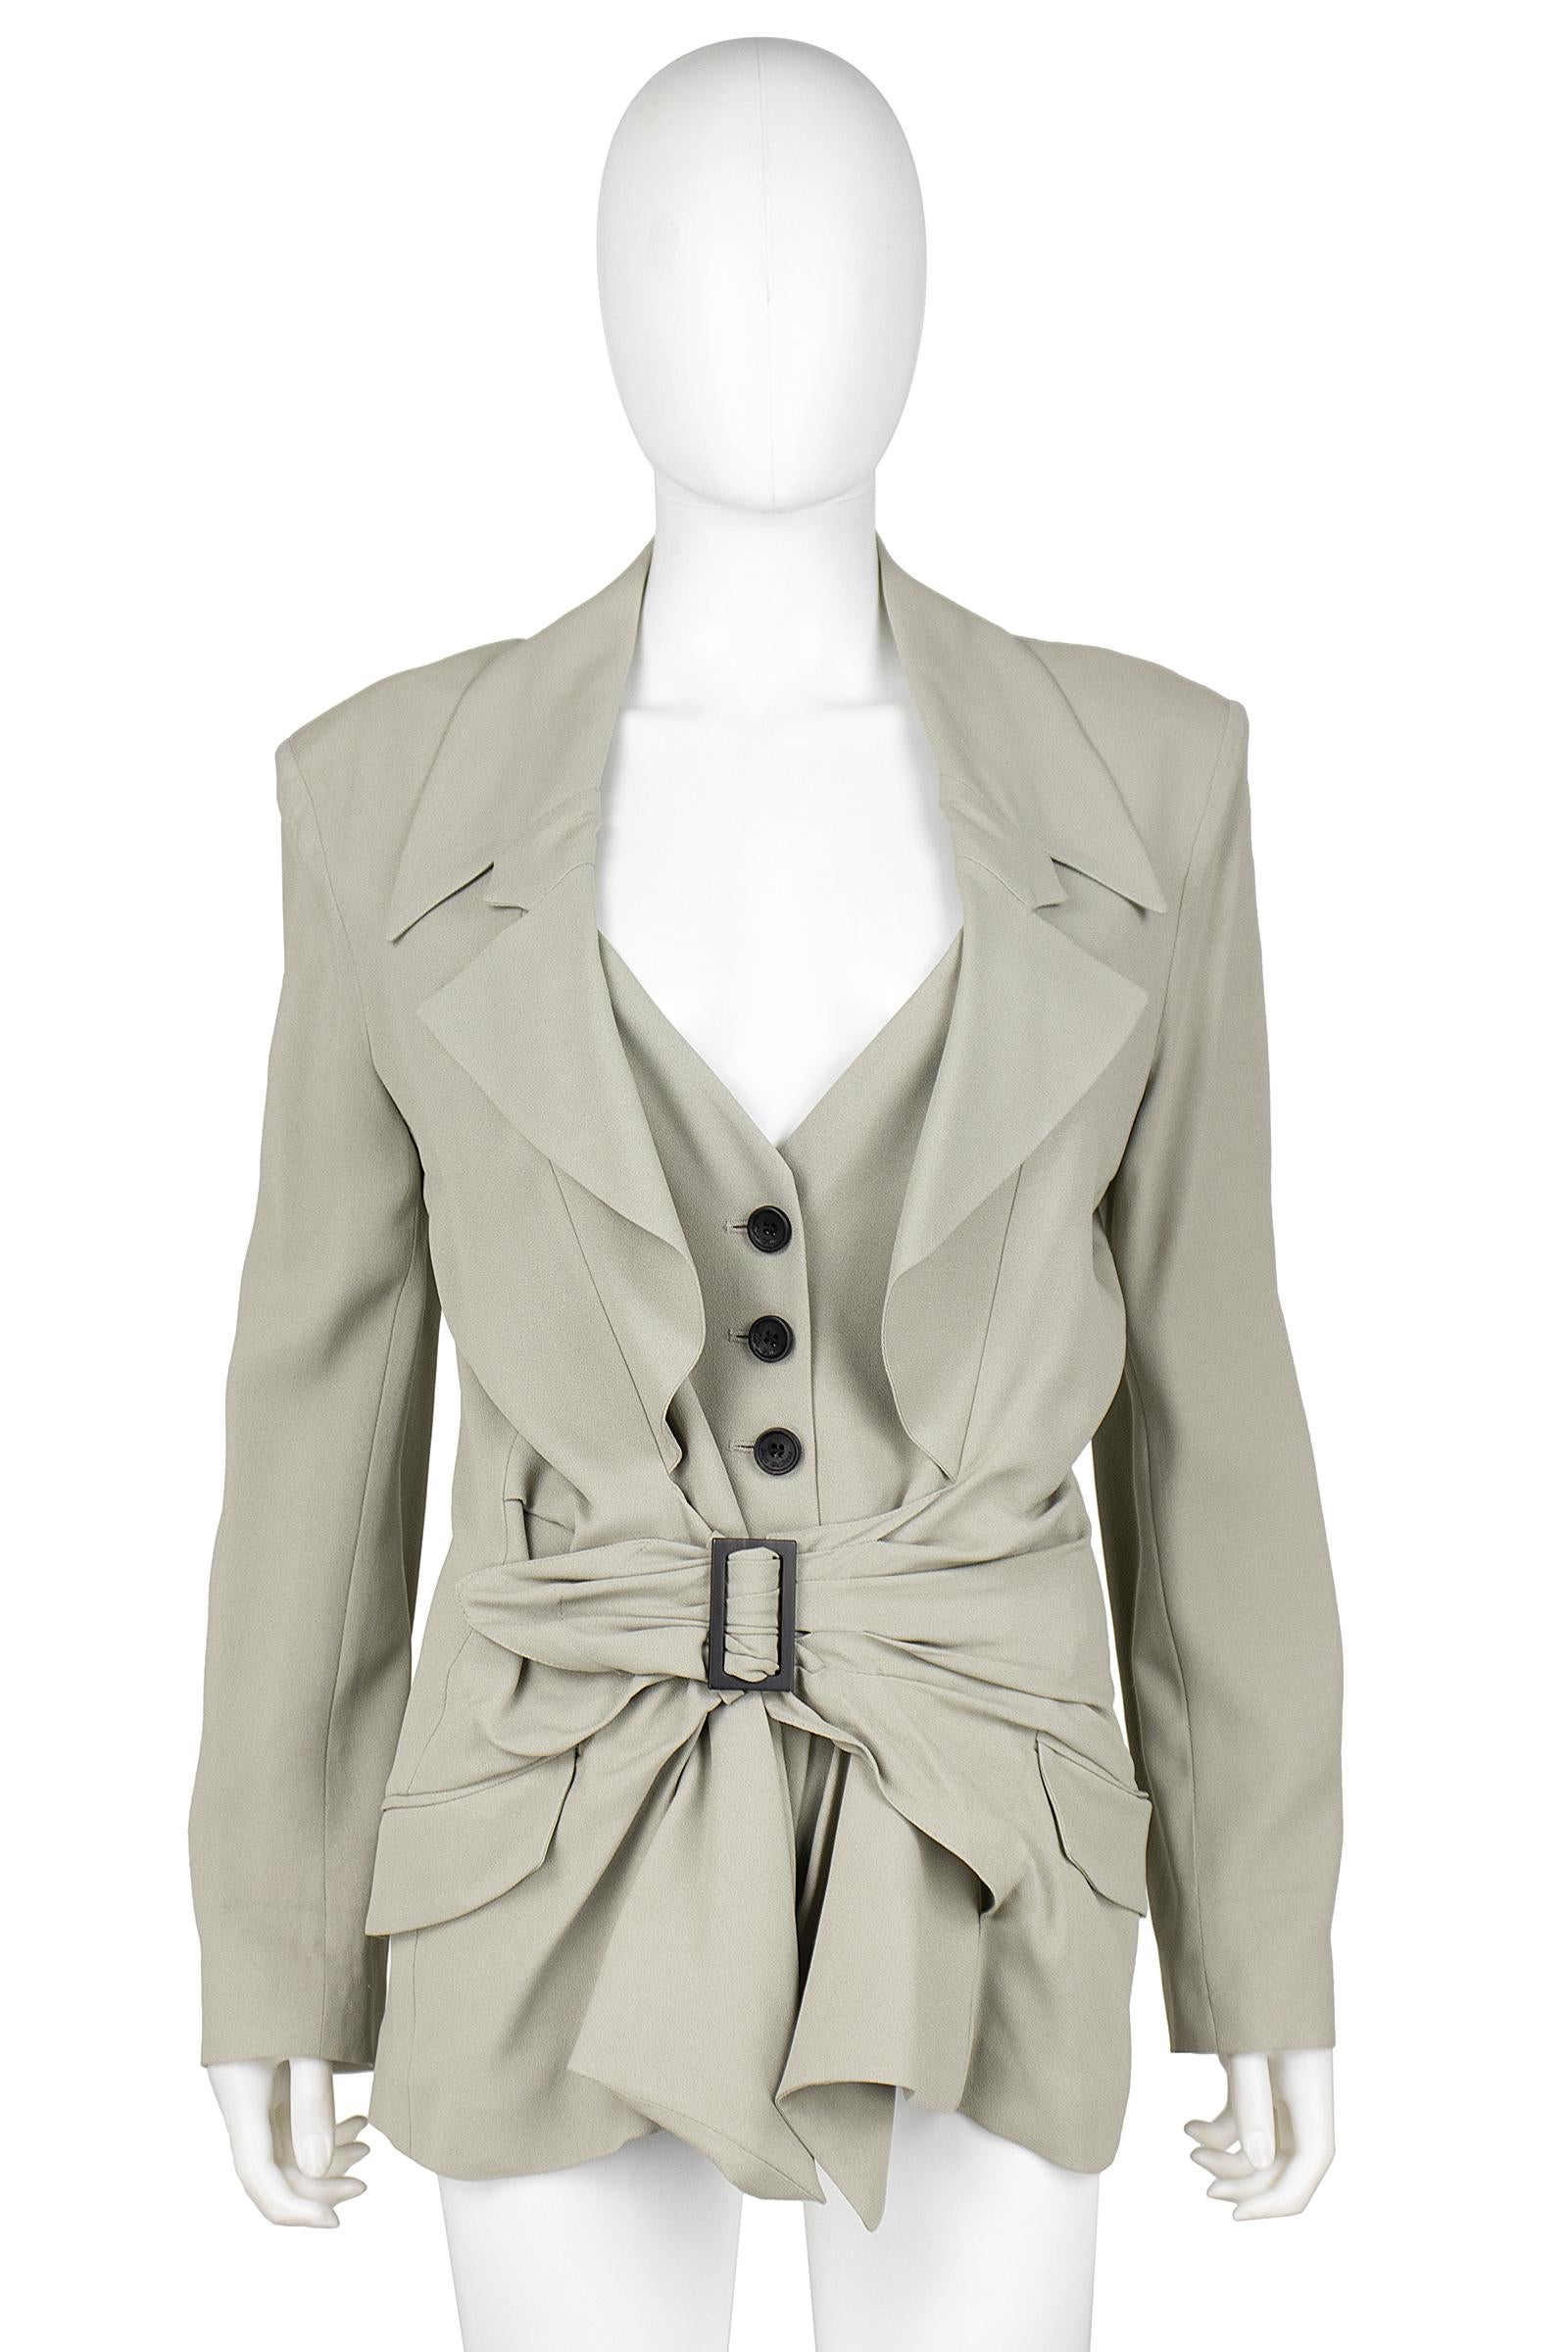 John Galliano blazer 
Beige crepe rayon blend  
Three notch collar 
Pleated waist detail with faux brown belt 
Faux vest design 
Brown button closures 
Brown buttons on the sleeve 
Back vent 
Upper back and sleeves lined in silk 
Made in Italy